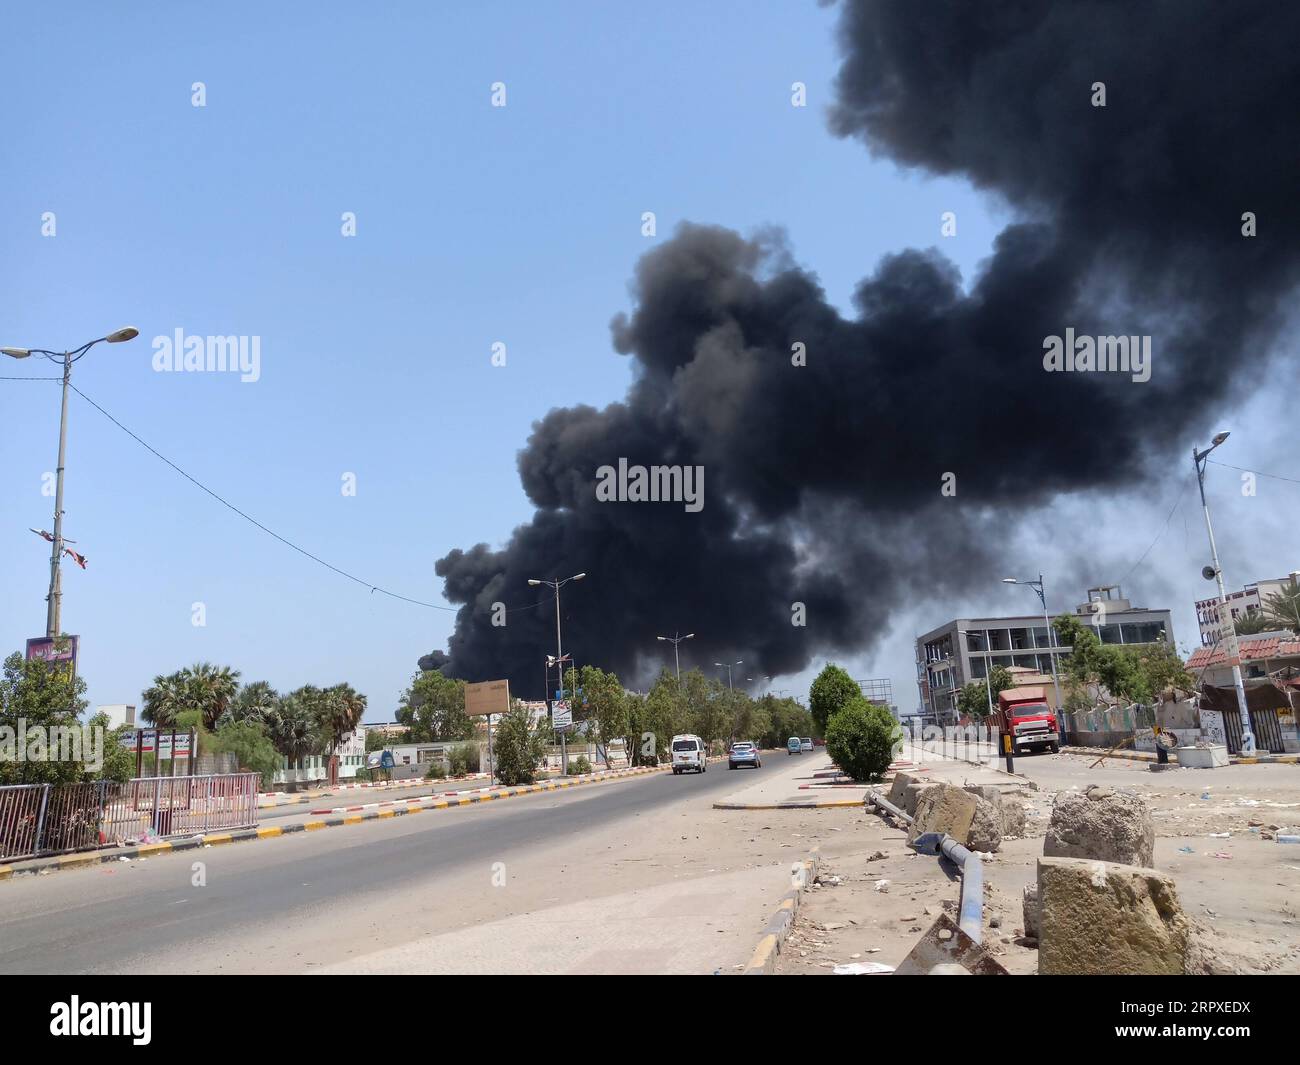 200519 -- ADEN, May 19, 2020 Xinhua -- Plumes of smoke rise after an oil truck-car collision in Aden, Yemen, May 19, 2020. Two people were killed and three others were injured after an oil carrier truck and a car collided in Yemen s southern port city of Aden on Tuesday, a security official told Xinhua. Photo by Murad Abdo/Xinhua YEMEN-ADEN-VEHICLE-COLLISION PUBLICATIONxNOTxINxCHN Stock Photo